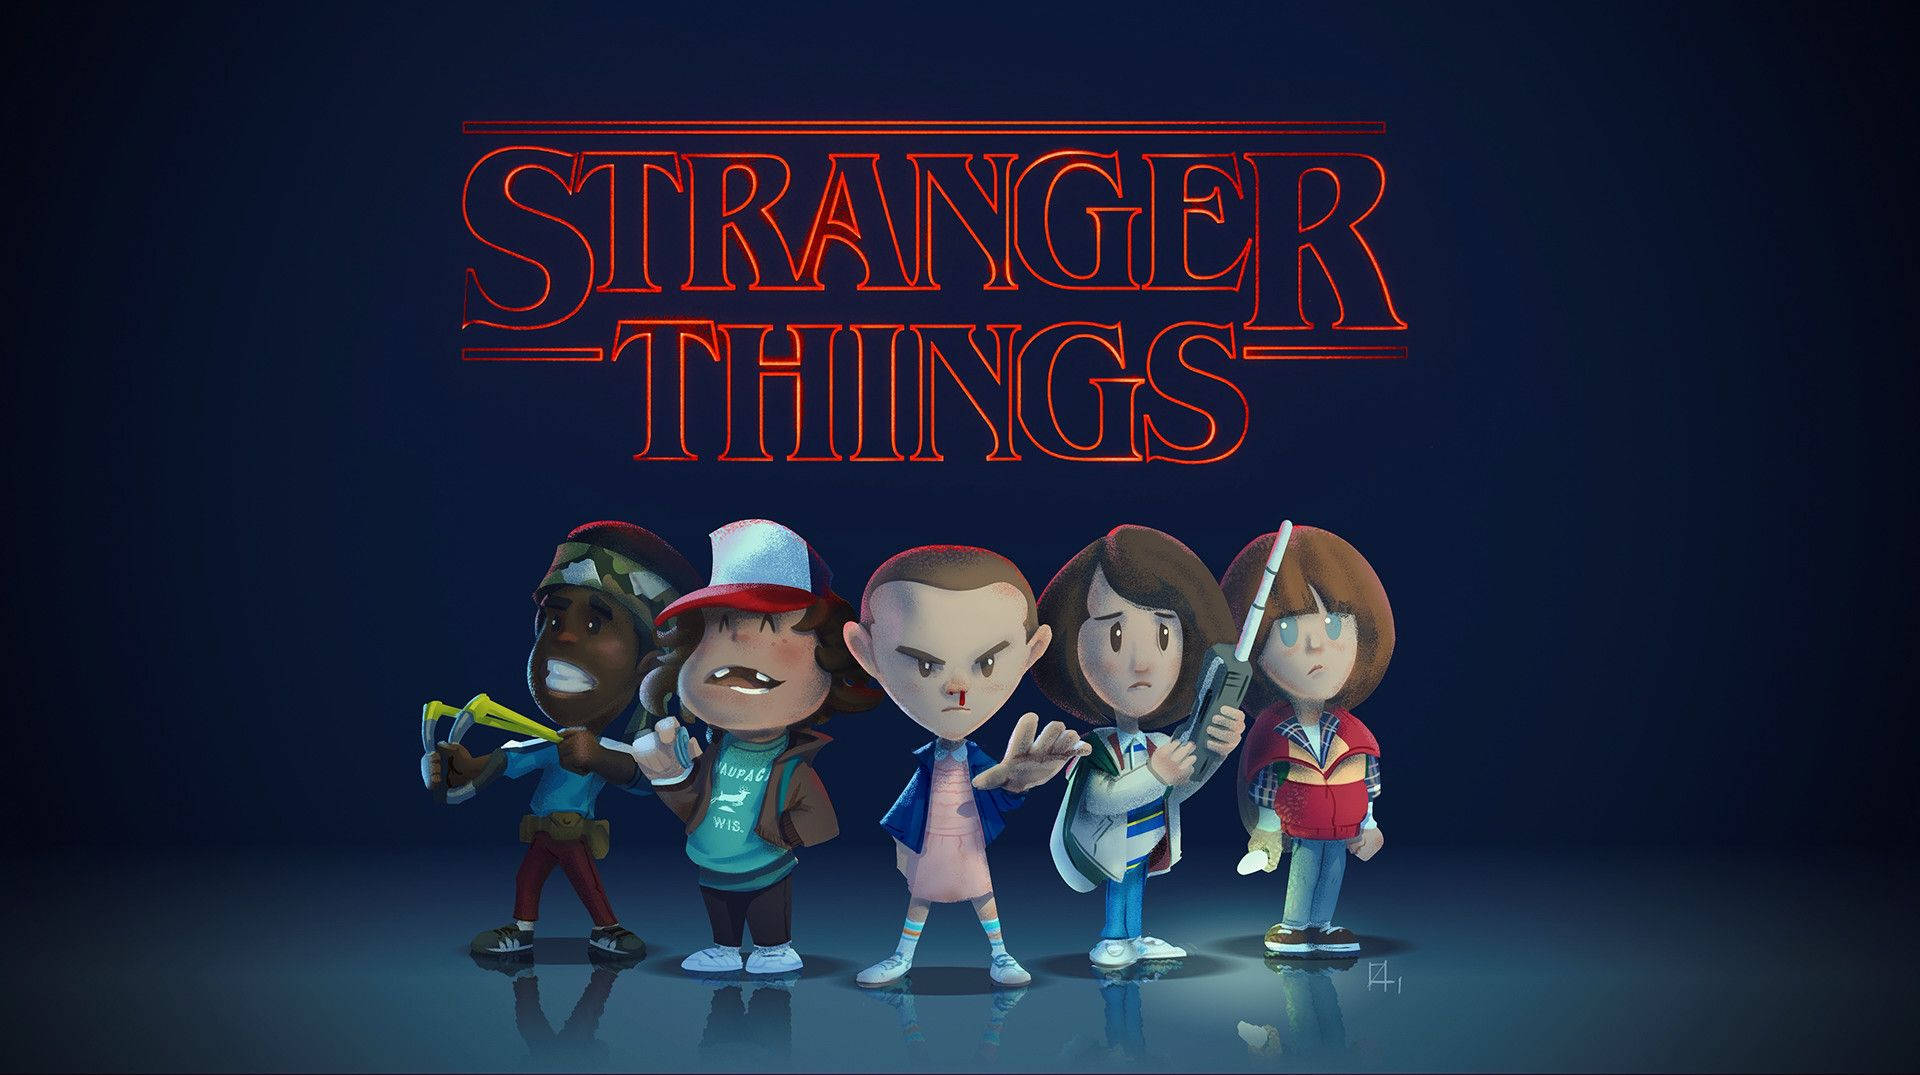 All your favorite characters from Stranger Things! Wallpaper